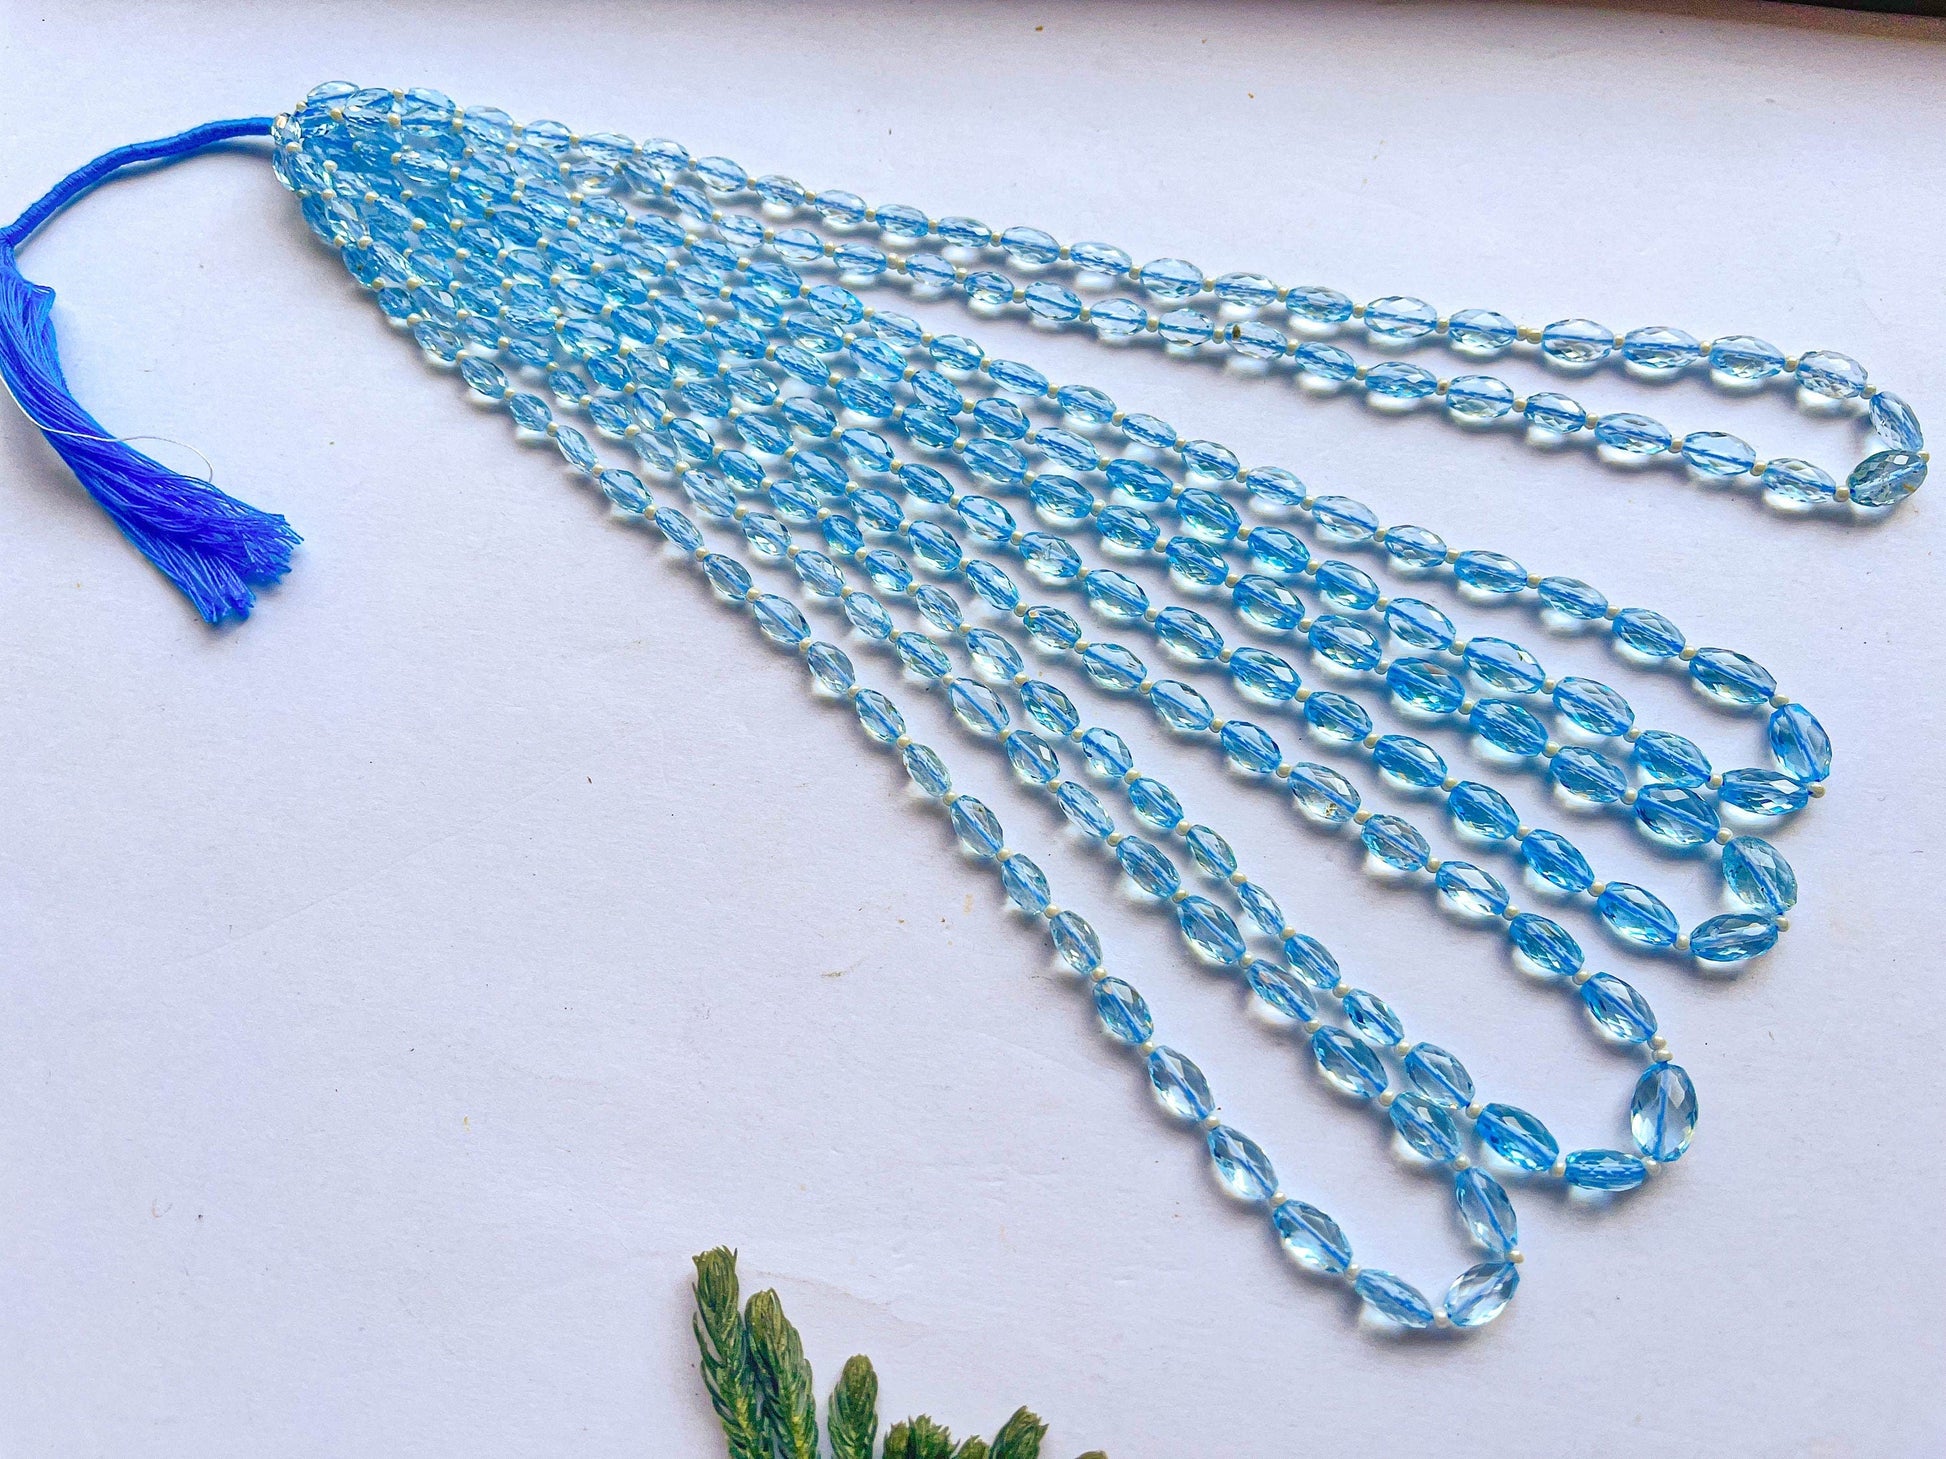 16 Inch BLUE TOPAZ Barrel Shape Faceted Beads, Natural Blue Topaz beads, Blue Topaz For jewelry, Blue Topaz Gemstone Beads, 5x7mm to 7x9mm Beadsforyourjewelry